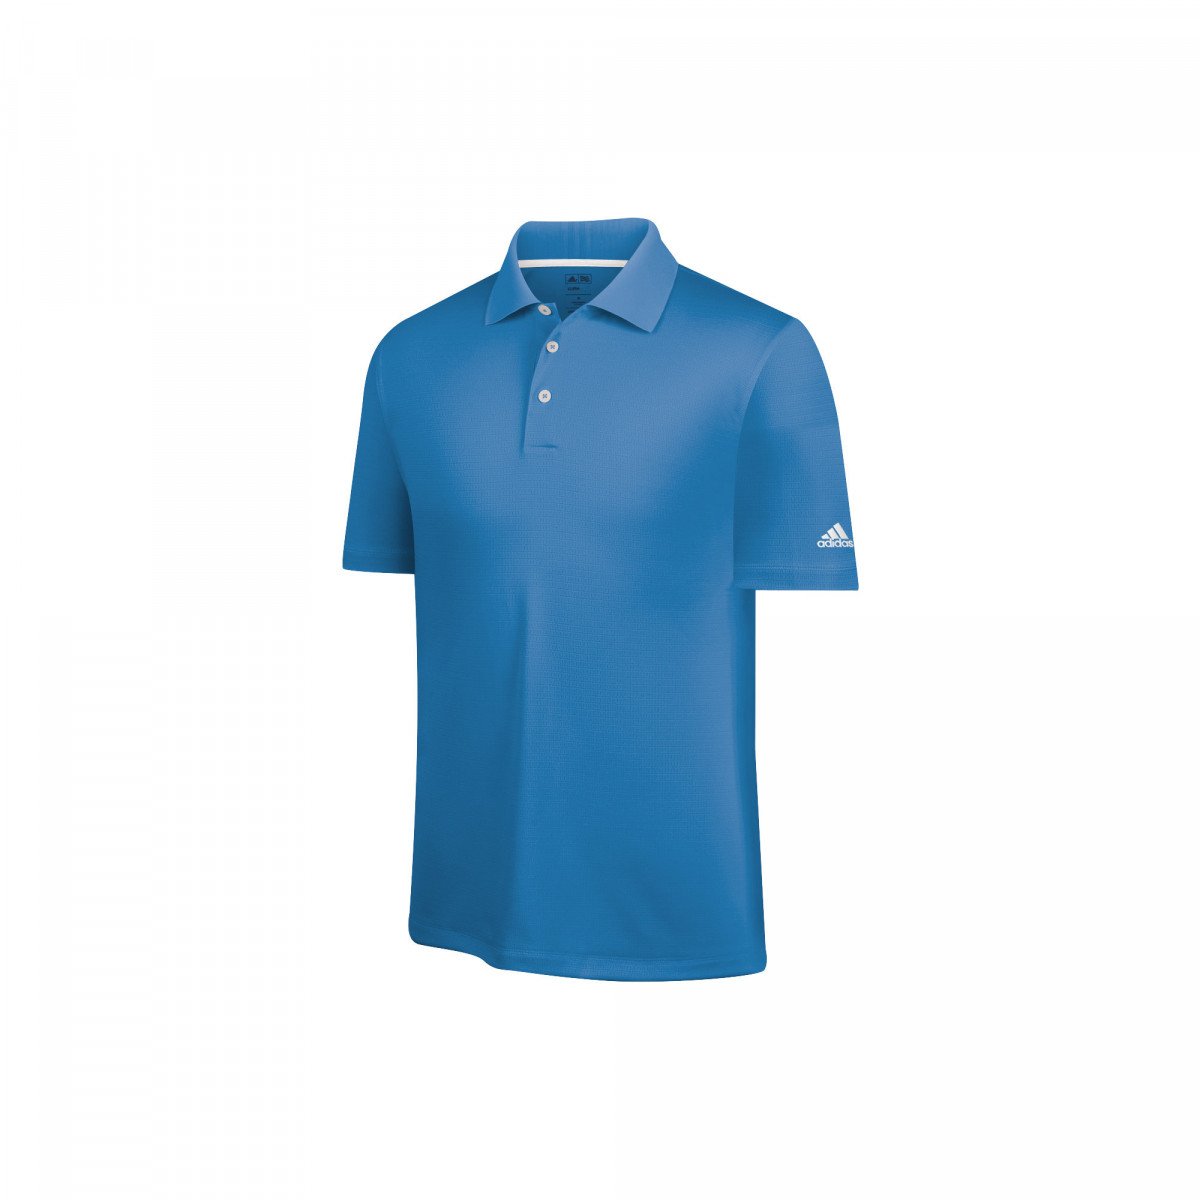 Adidas ClimaLite Short Sleeve Solid Polo - Discount Golf Apparel ...